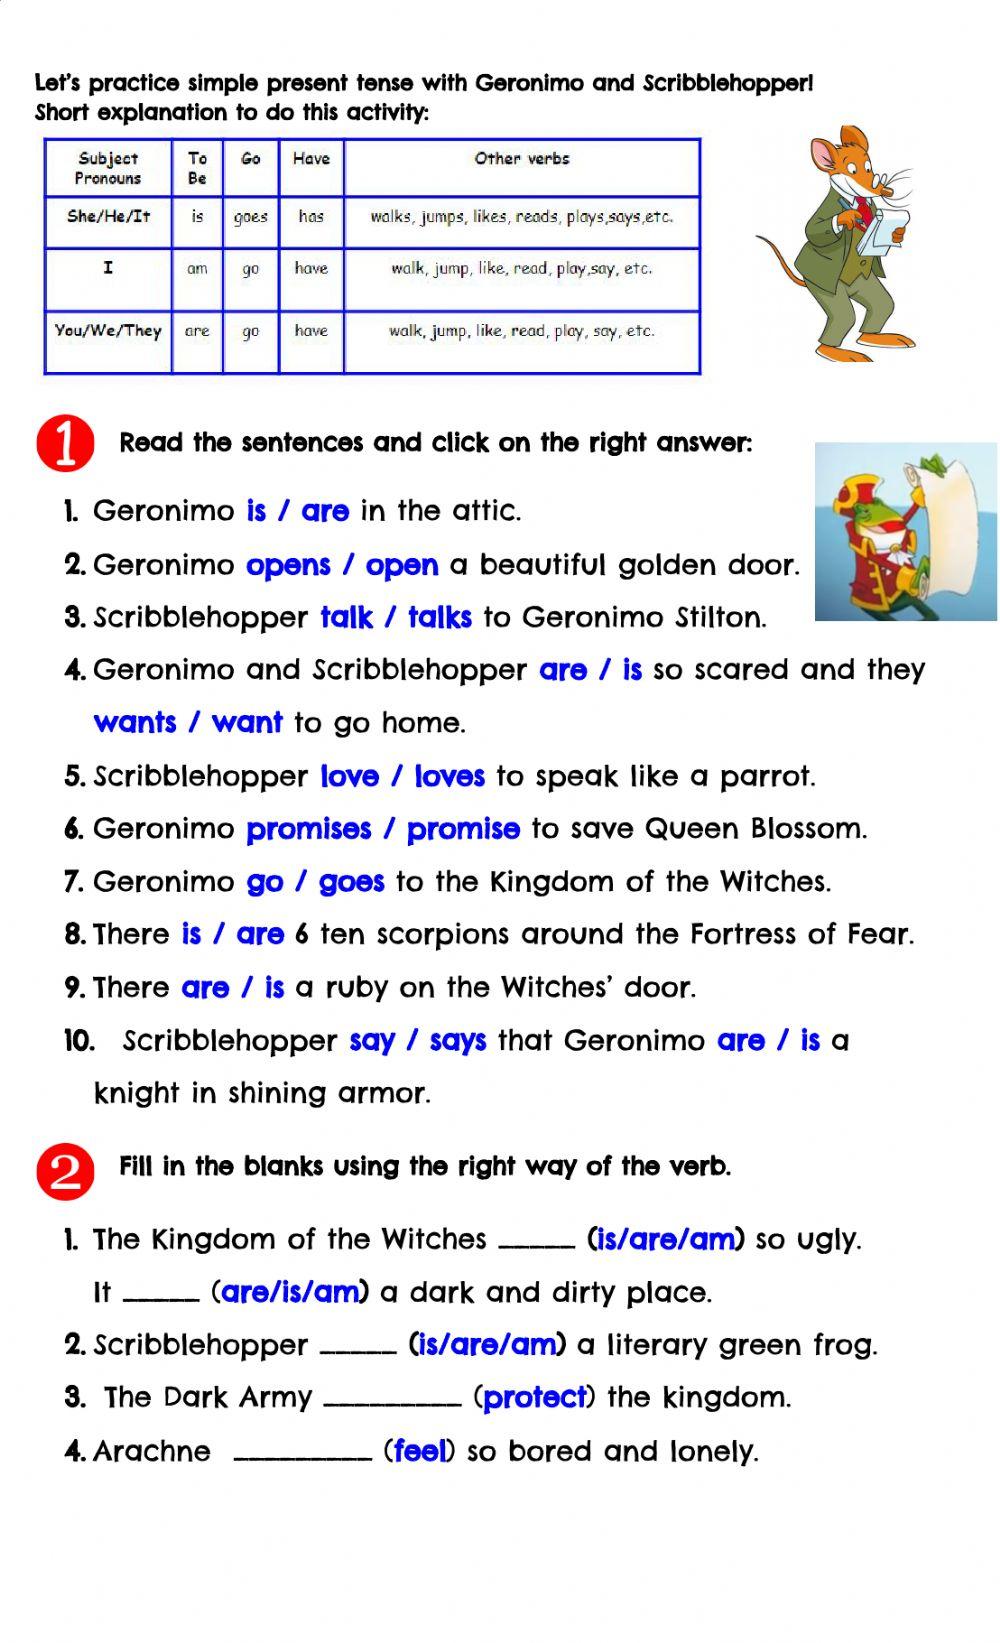 Let’s practice simple present tense with Geronimo and Scribblehopper!